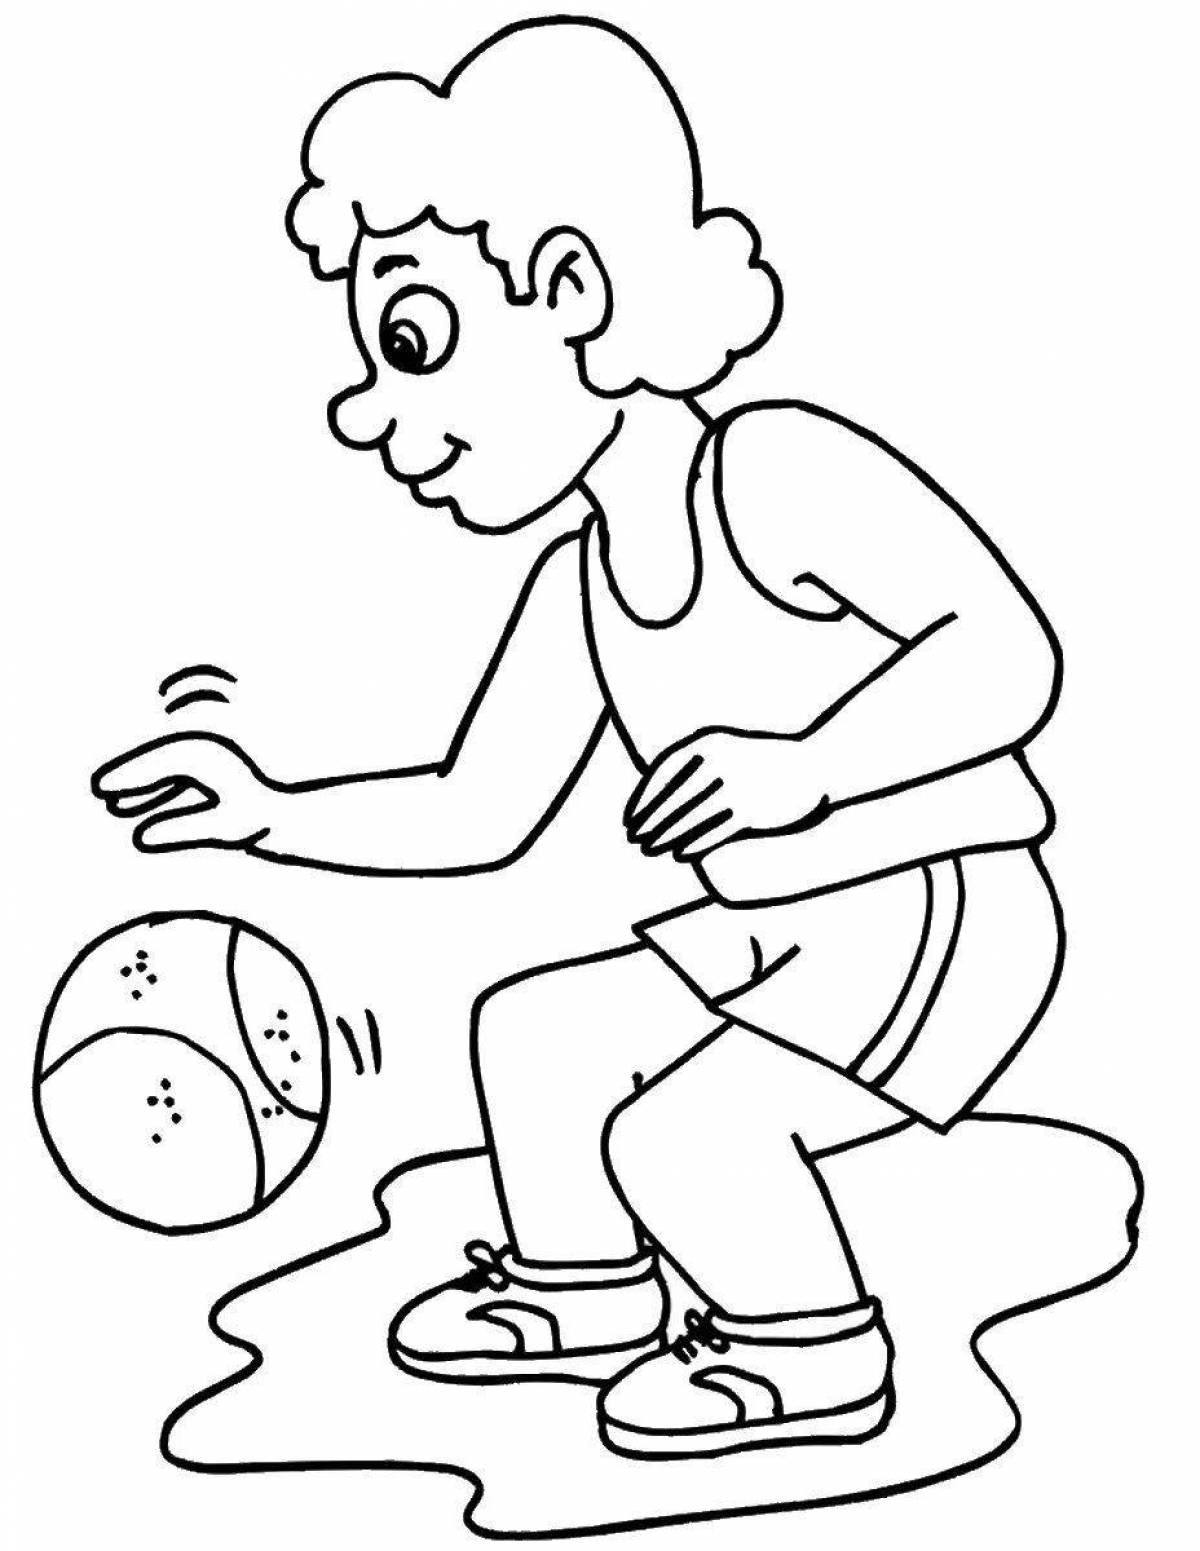 Amazing Health Coloring Page